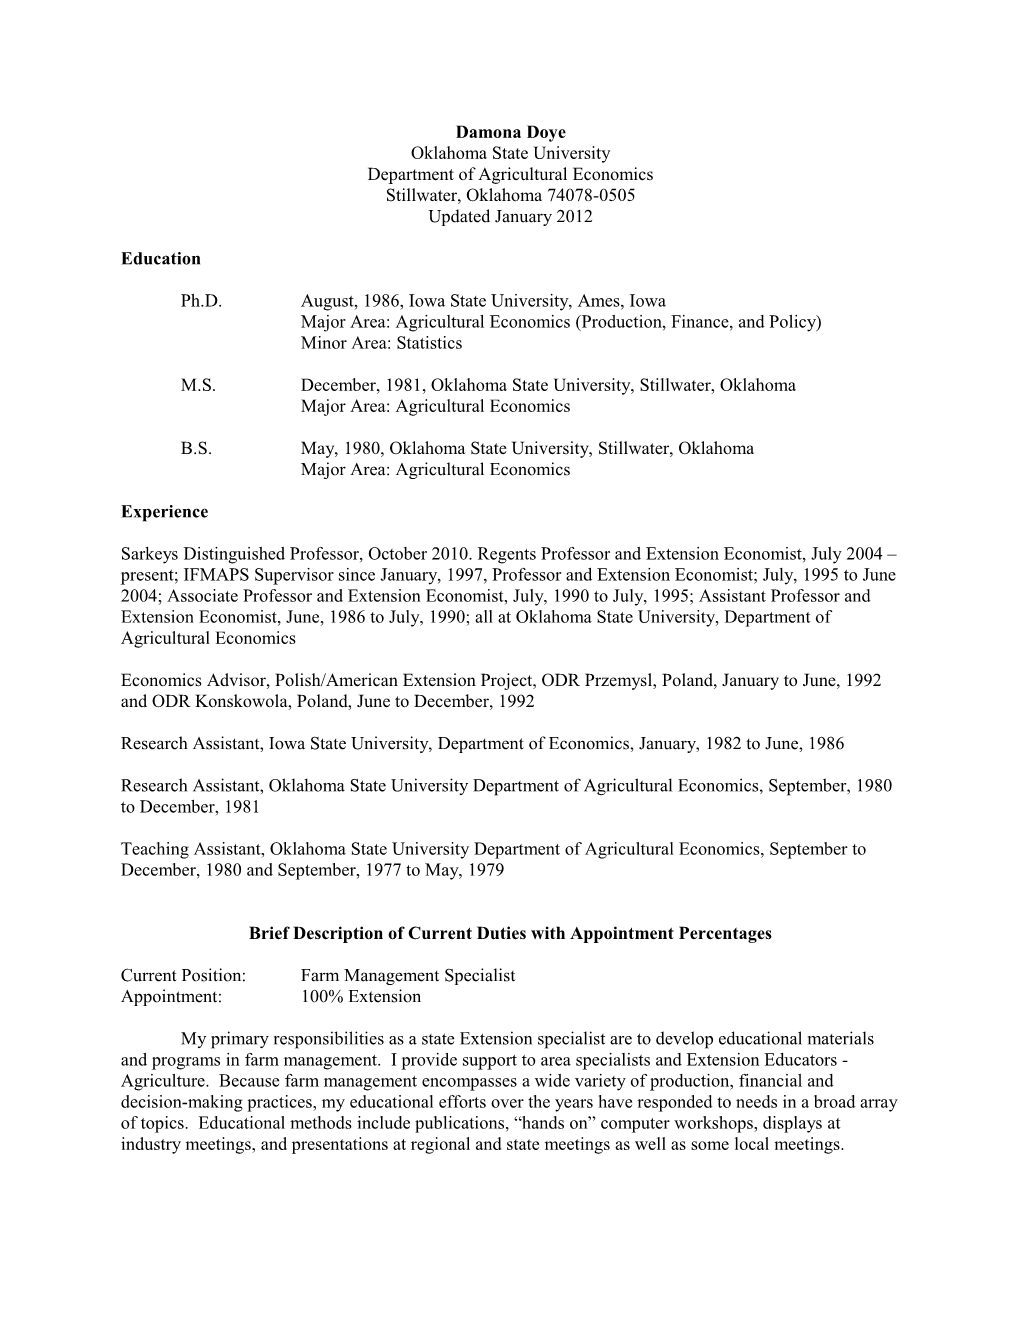 Resume for Personnel Committee